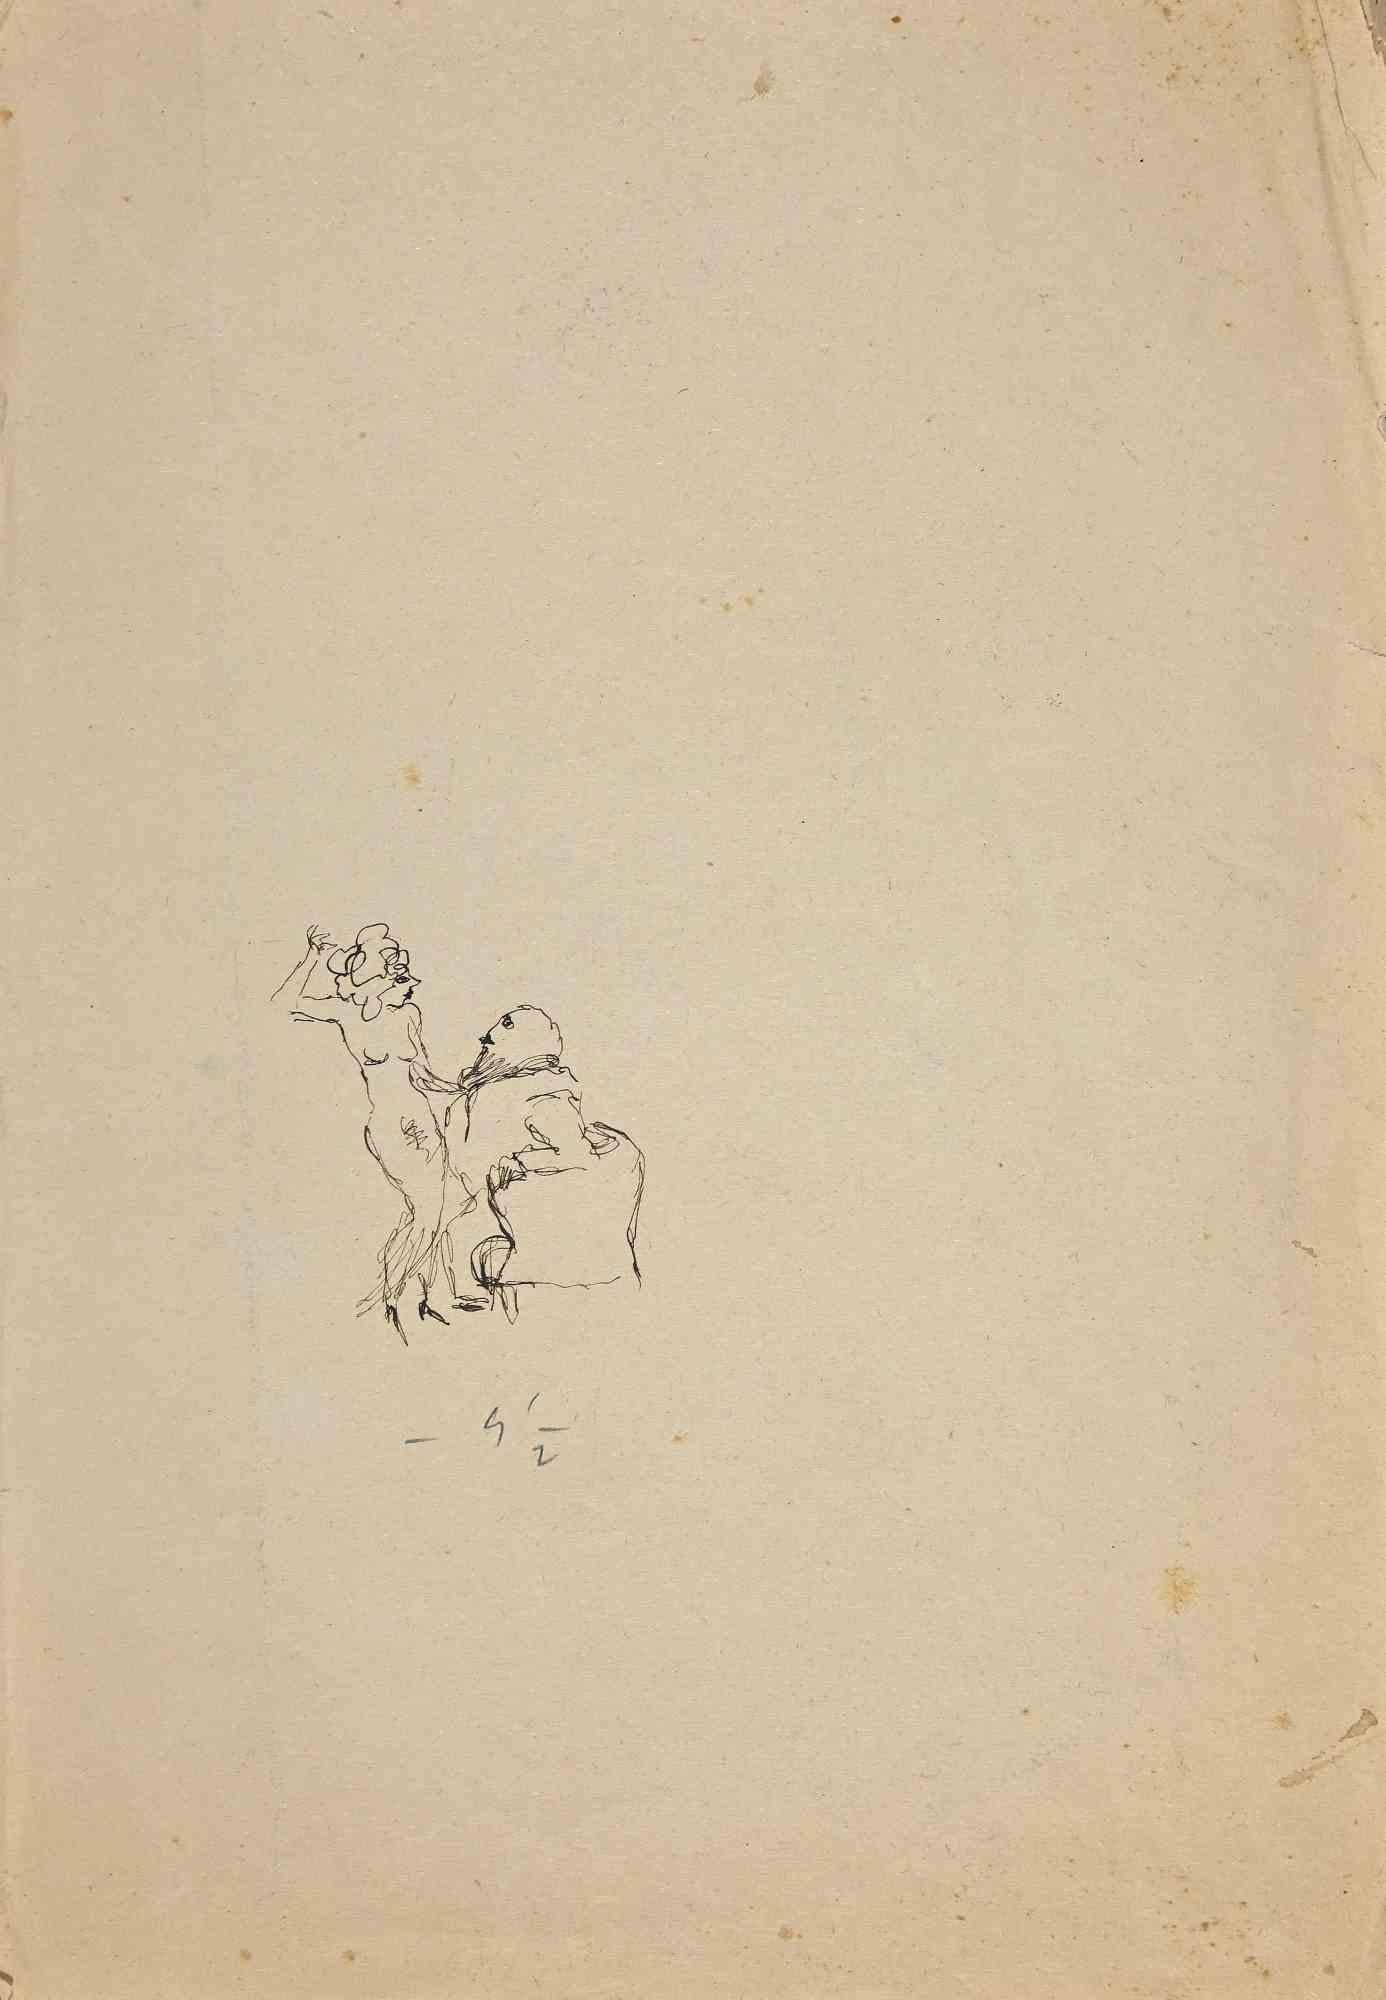 The Seduce is an original china ink drawing on creamy paper realized by Mino Maccari in mid 20th century.

Good conditions with aged margins.

Mino Maccari (1898-1989) was an Italian writer, painter, engraver and journalist, winner the Feltrinelli